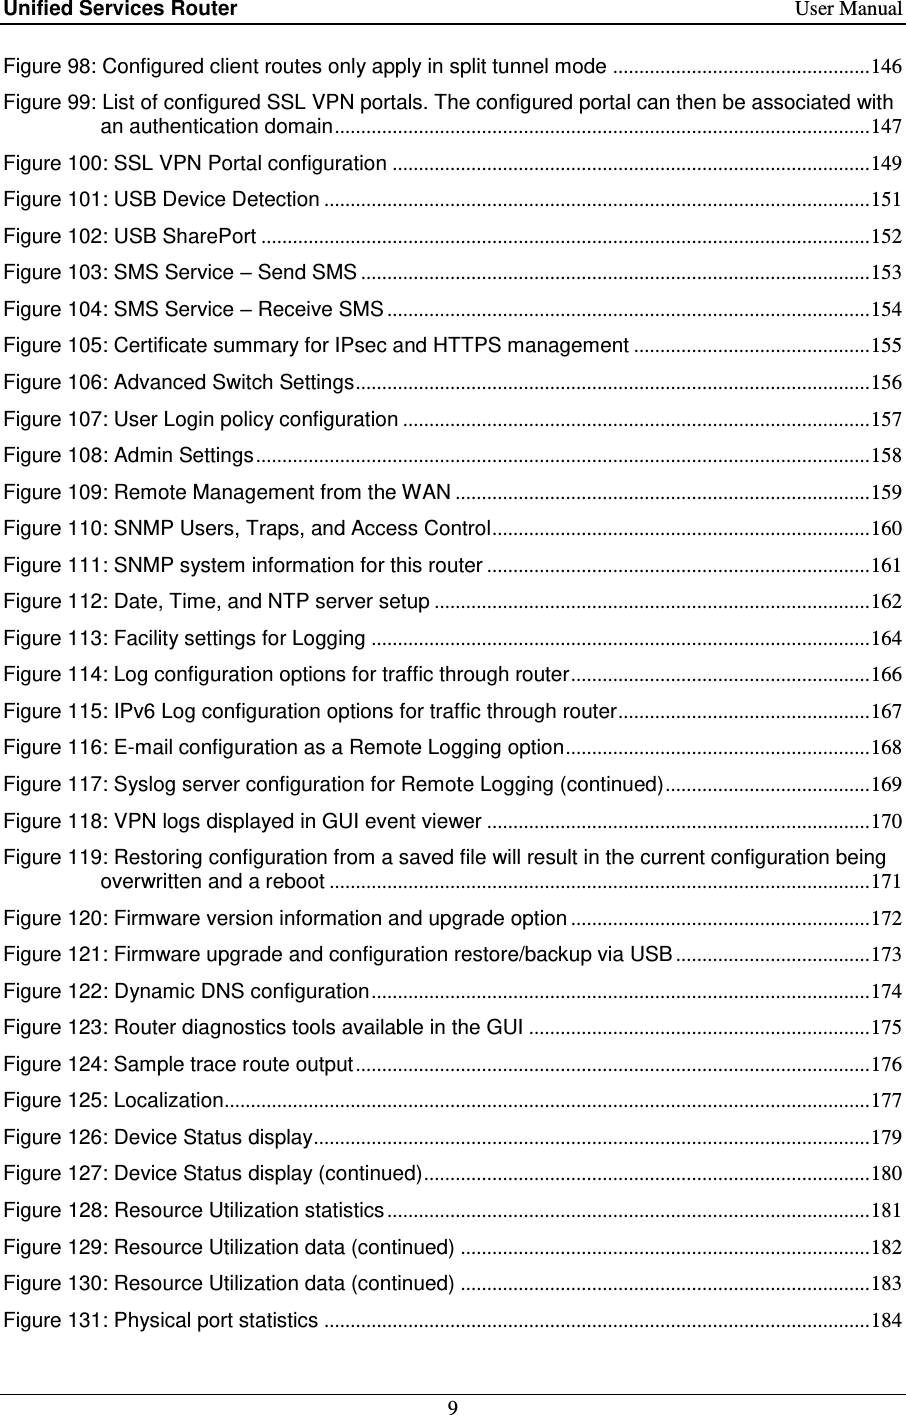 Unified Services Router    User Manual 9  Figure 98: Configured client routes only apply in split tunnel mode ................................................. 146 Figure 99: List of configured SSL VPN portals. The configured portal can then be associated with an authentication domain ...................................................................................................... 147 Figure 100: SSL VPN Portal configuration ........................................................................................... 149 Figure 101: USB Device Detection ........................................................................................................ 151 Figure 102: USB SharePort .................................................................................................................... 152 Figure 103: SMS Service – Send SMS ................................................................................................. 153 Figure 104: SMS Service – Receive SMS ............................................................................................ 154 Figure 105: Certificate summary for IPsec and HTTPS management ............................................. 155 Figure 106: Advanced Switch Settings .................................................................................................. 156 Figure 107: User Login policy configuration ......................................................................................... 157 Figure 108: Admin Settings ..................................................................................................................... 158 Figure 109: Remote Management from the WAN ............................................................................... 159 Figure 110: SNMP Users, Traps, and Access Control ........................................................................ 160 Figure 111: SNMP system information for this router ......................................................................... 161 Figure 112: Date, Time, and NTP server setup ................................................................................... 162 Figure 113: Facility settings for Logging ............................................................................................... 164 Figure 114: Log configuration options for traffic through router ......................................................... 166 Figure 115: IPv6 Log configuration options for traffic through router ................................................ 167 Figure 116: E-mail configuration as a Remote Logging option .......................................................... 168 Figure 117: Syslog server configuration for Remote Logging (continued) ....................................... 169 Figure 118: VPN logs displayed in GUI event viewer ......................................................................... 170 Figure 119: Restoring configuration from a saved file will result in the current configuration being overwritten and a reboot ....................................................................................................... 171 Figure 120: Firmware version information and upgrade option ......................................................... 172 Figure 121: Firmware upgrade and configuration restore/backup via USB ..................................... 173 Figure 122: Dynamic DNS configuration ............................................................................................... 174 Figure 123: Router diagnostics tools available in the GUI ................................................................. 175 Figure 124: Sample trace route output .................................................................................................. 176 Figure 125: Localization........................................................................................................................... 177 Figure 126: Device Status display .......................................................................................................... 179 Figure 127: Device Status display (continued) ..................................................................................... 180 Figure 128: Resource Utilization statistics ............................................................................................ 181 Figure 129: Resource Utilization data (continued) .............................................................................. 182 Figure 130: Resource Utilization data (continued) .............................................................................. 183 Figure 131: Physical port statistics ........................................................................................................ 184 